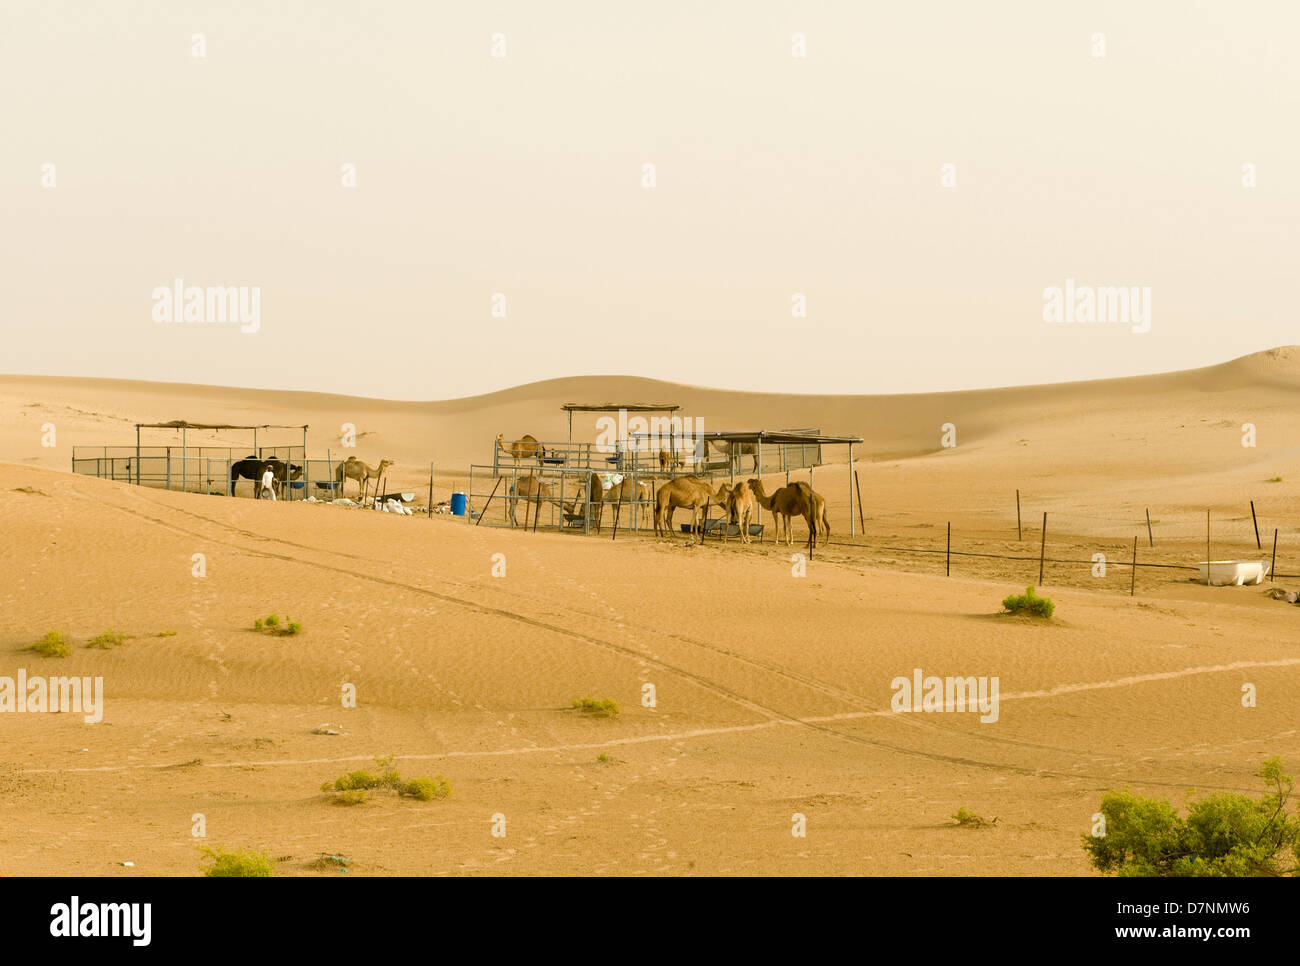 A small desert camel farm for dromedary camels in Abu Dhabi Stock Photo